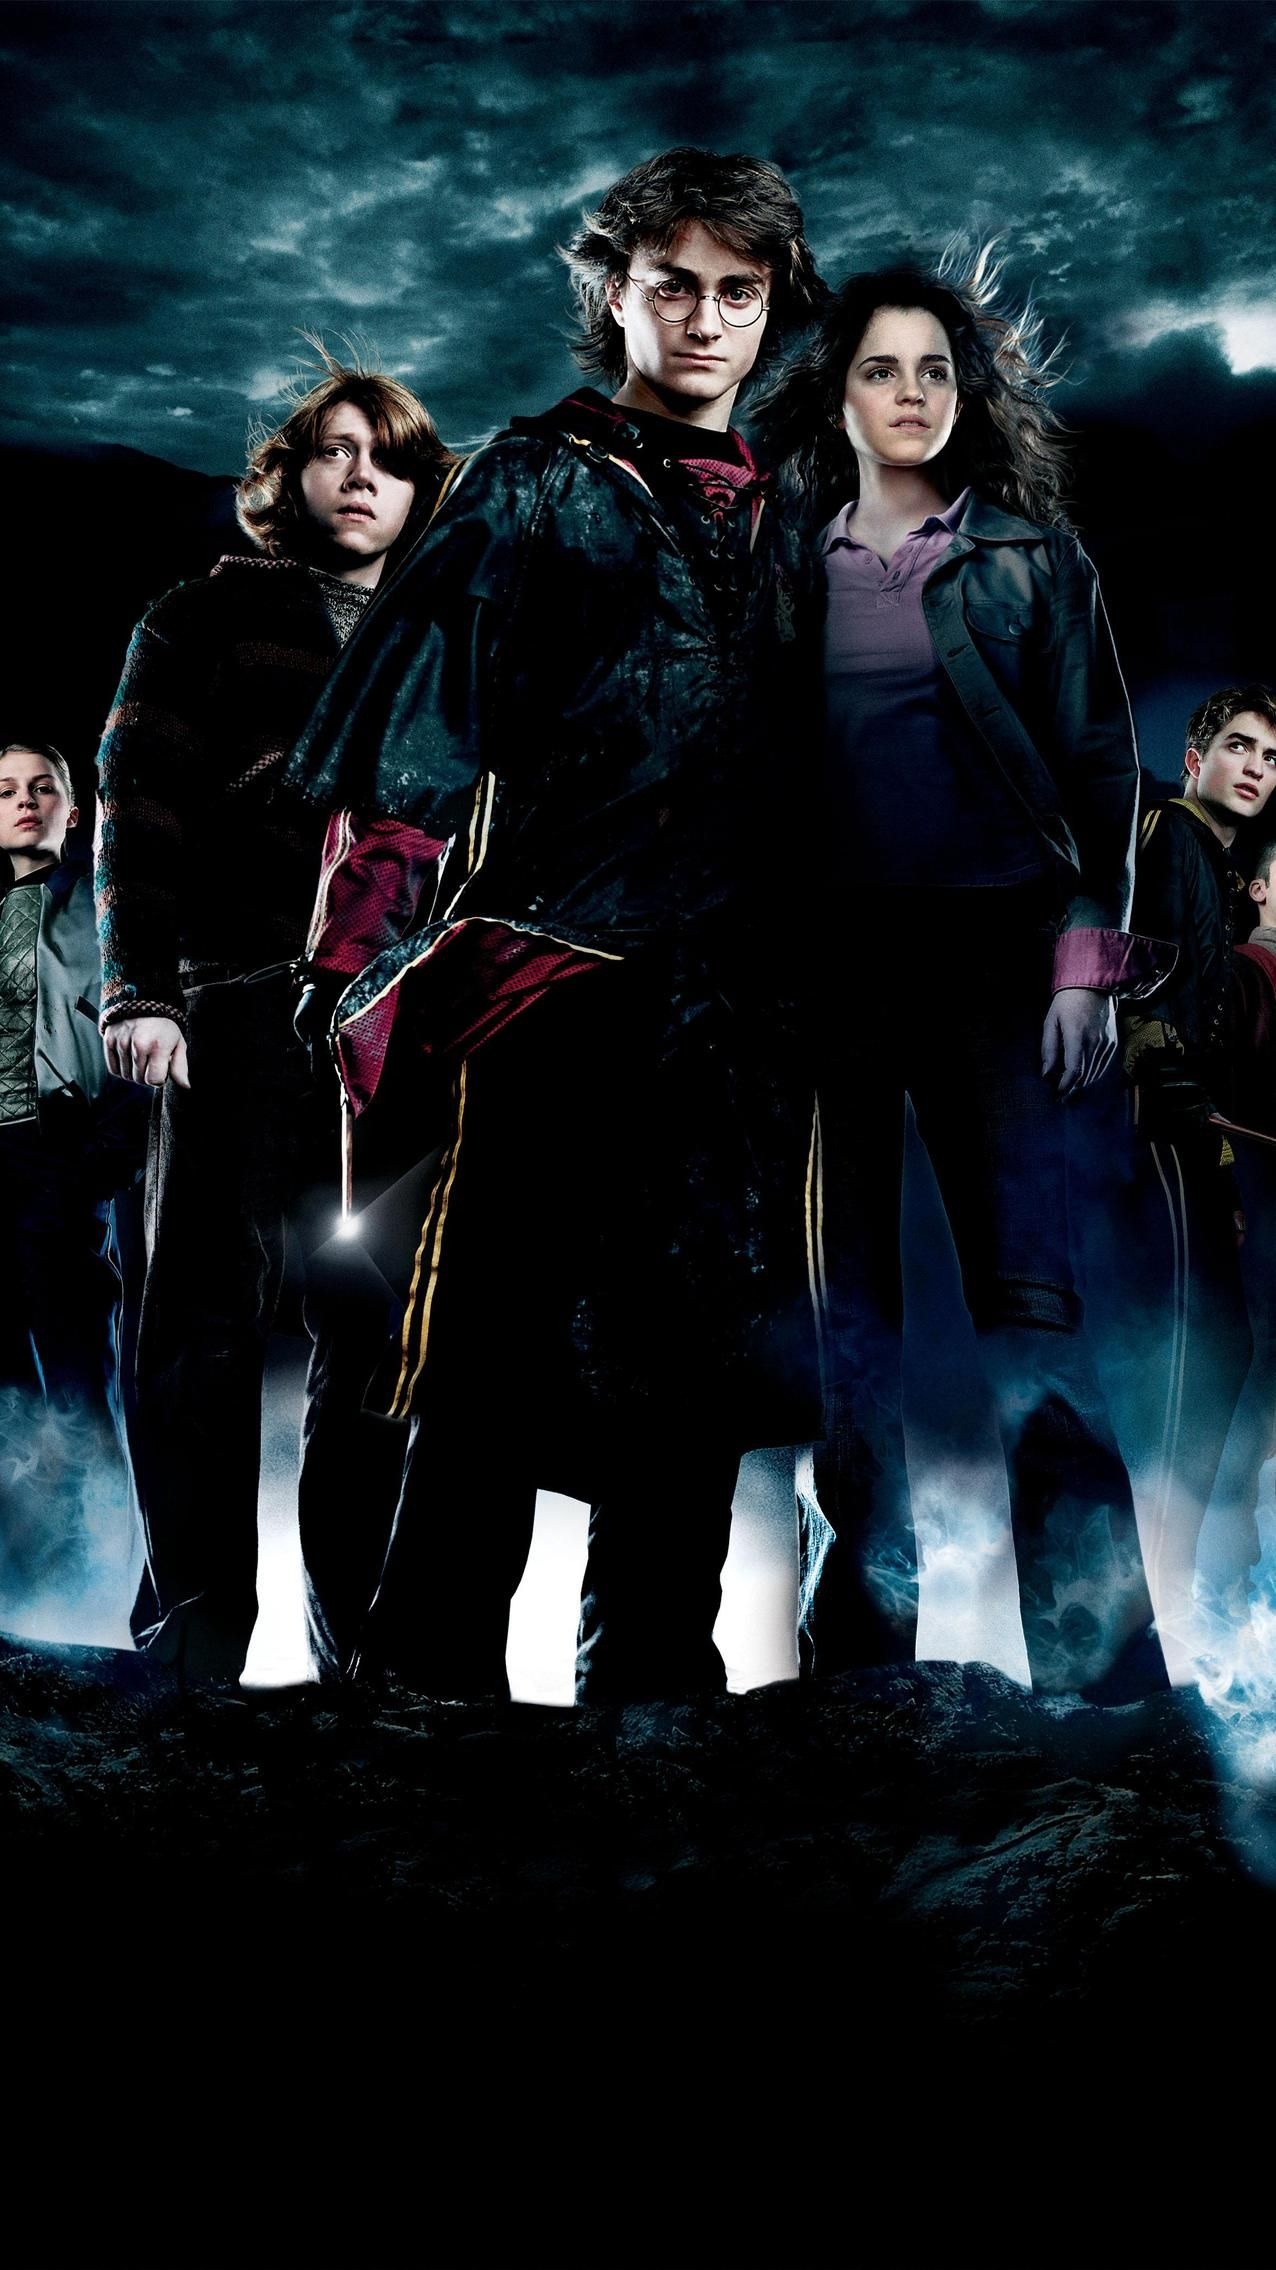 Harry Potter, Goblet of Fire, Phone wallpaper, Moviemania, 1280x2270 HD Handy